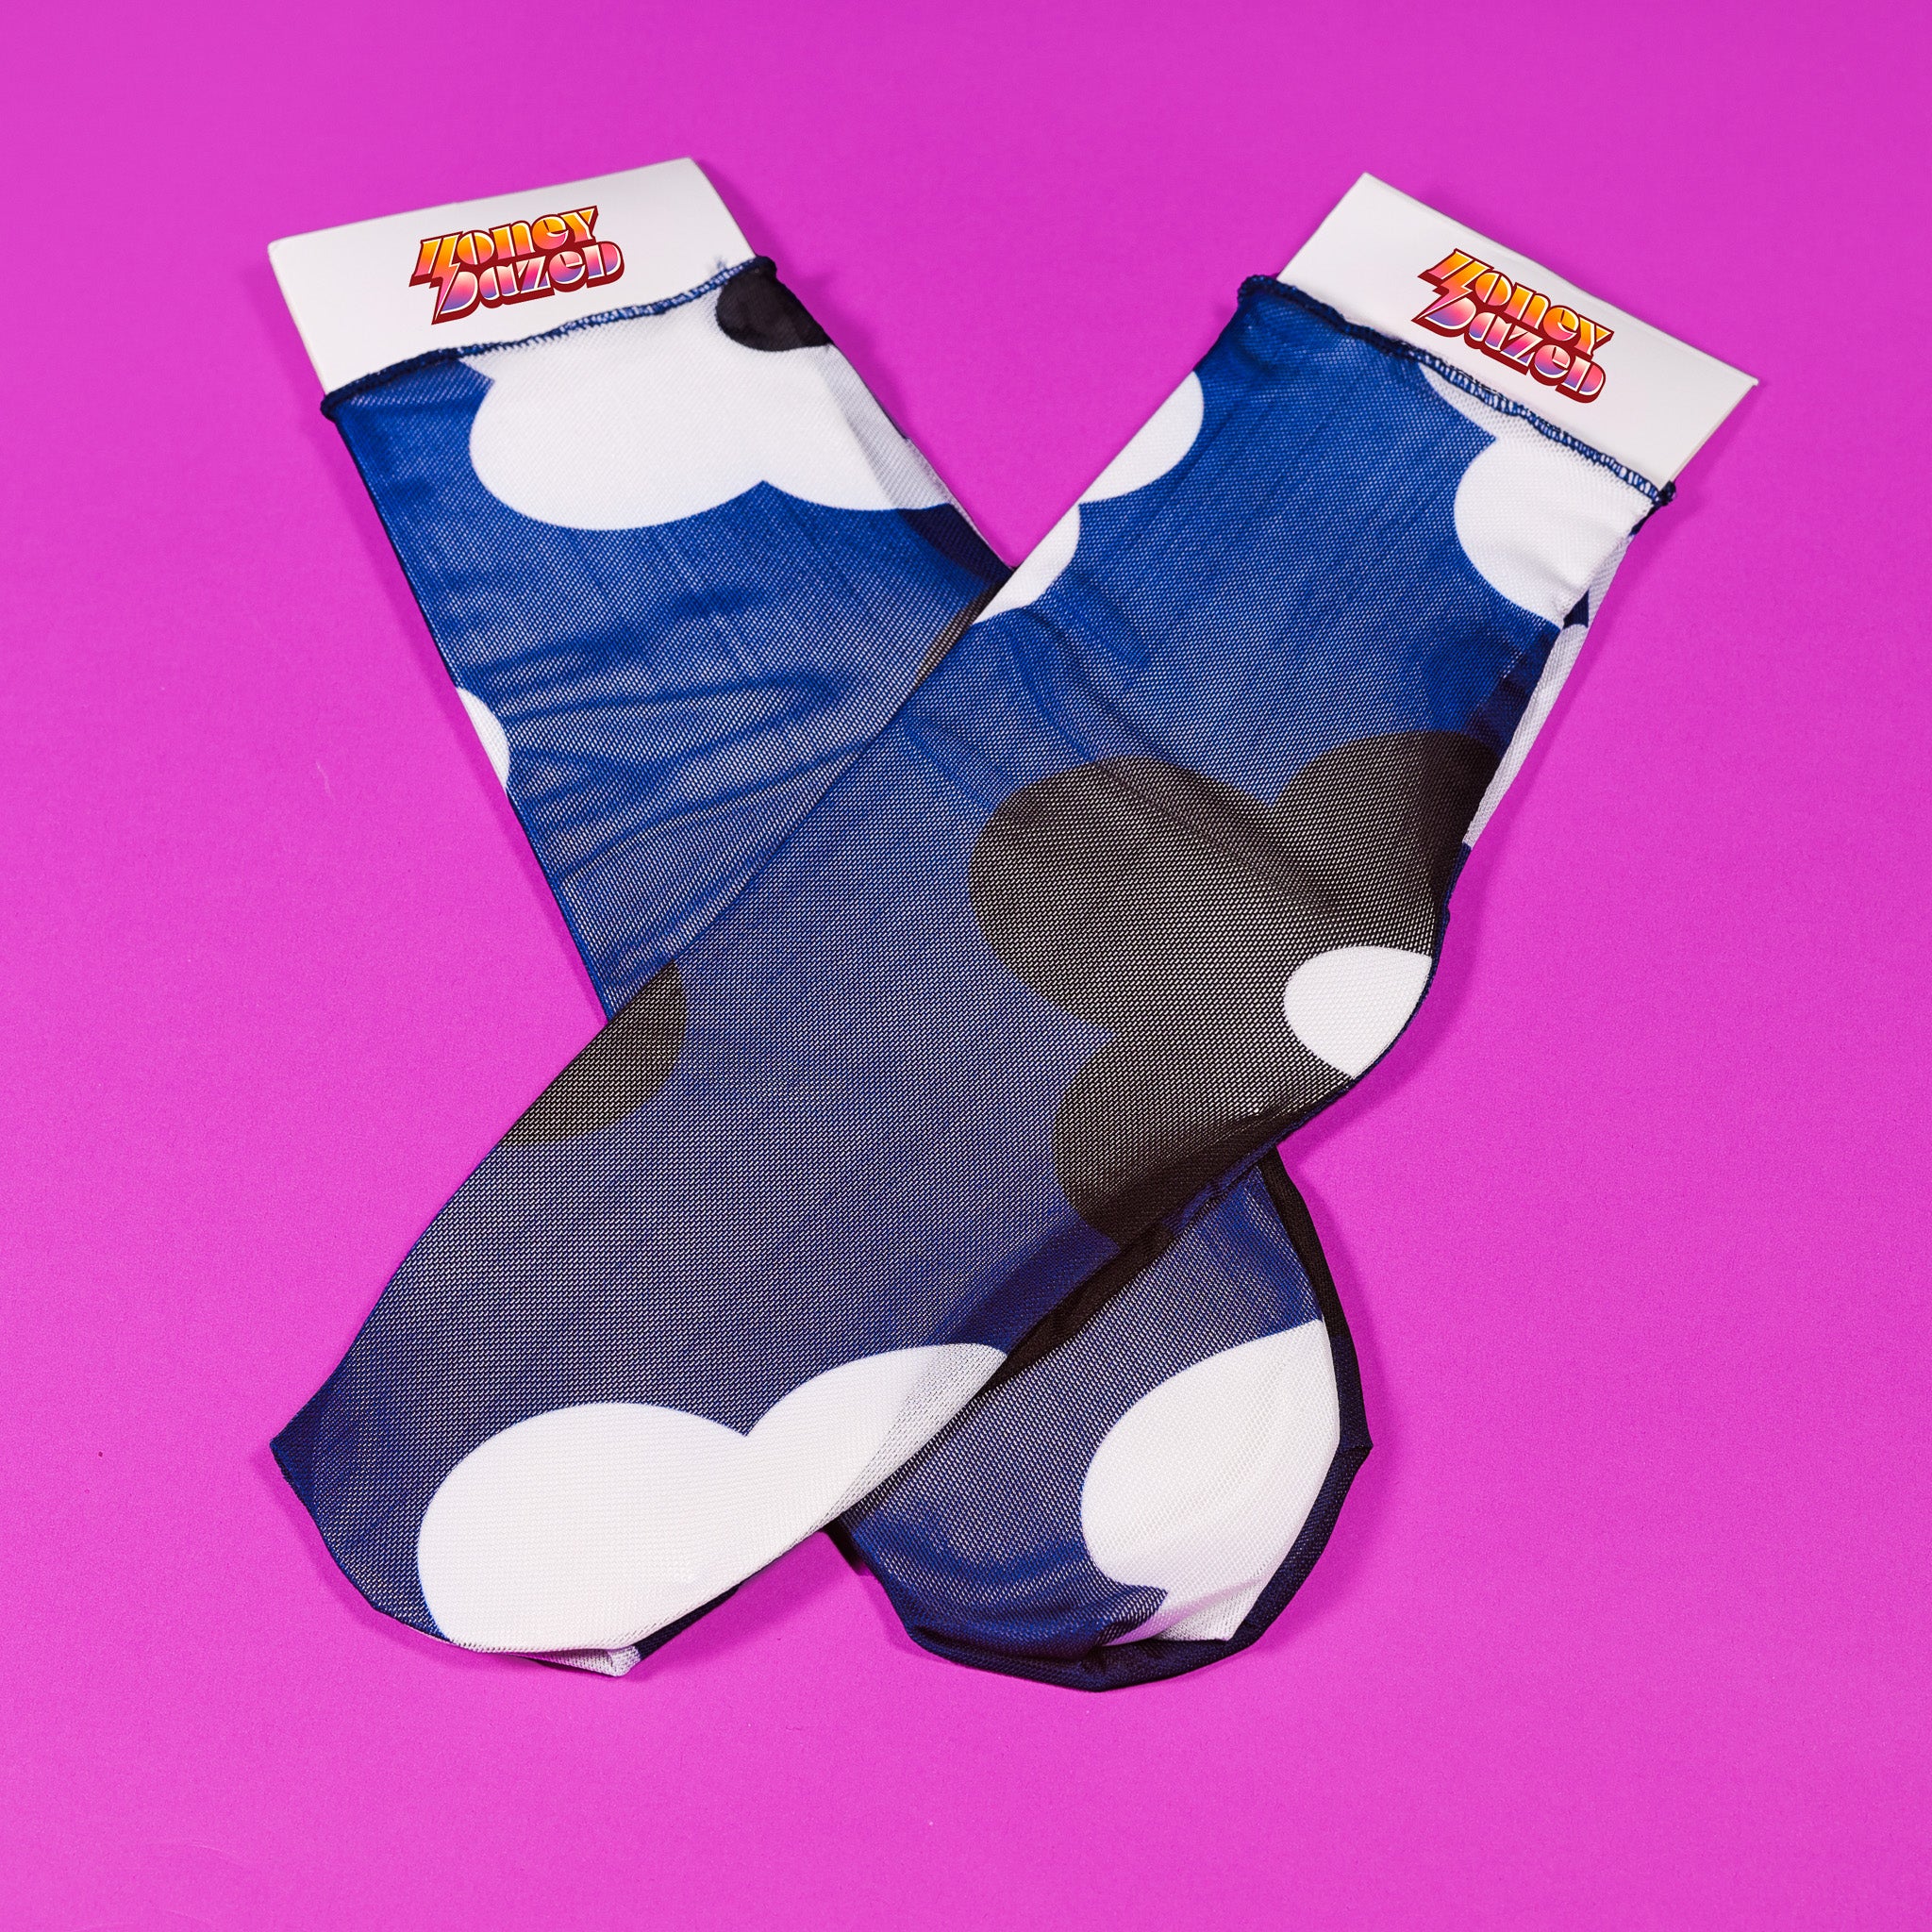 a pair of blue and white socks on a pink background